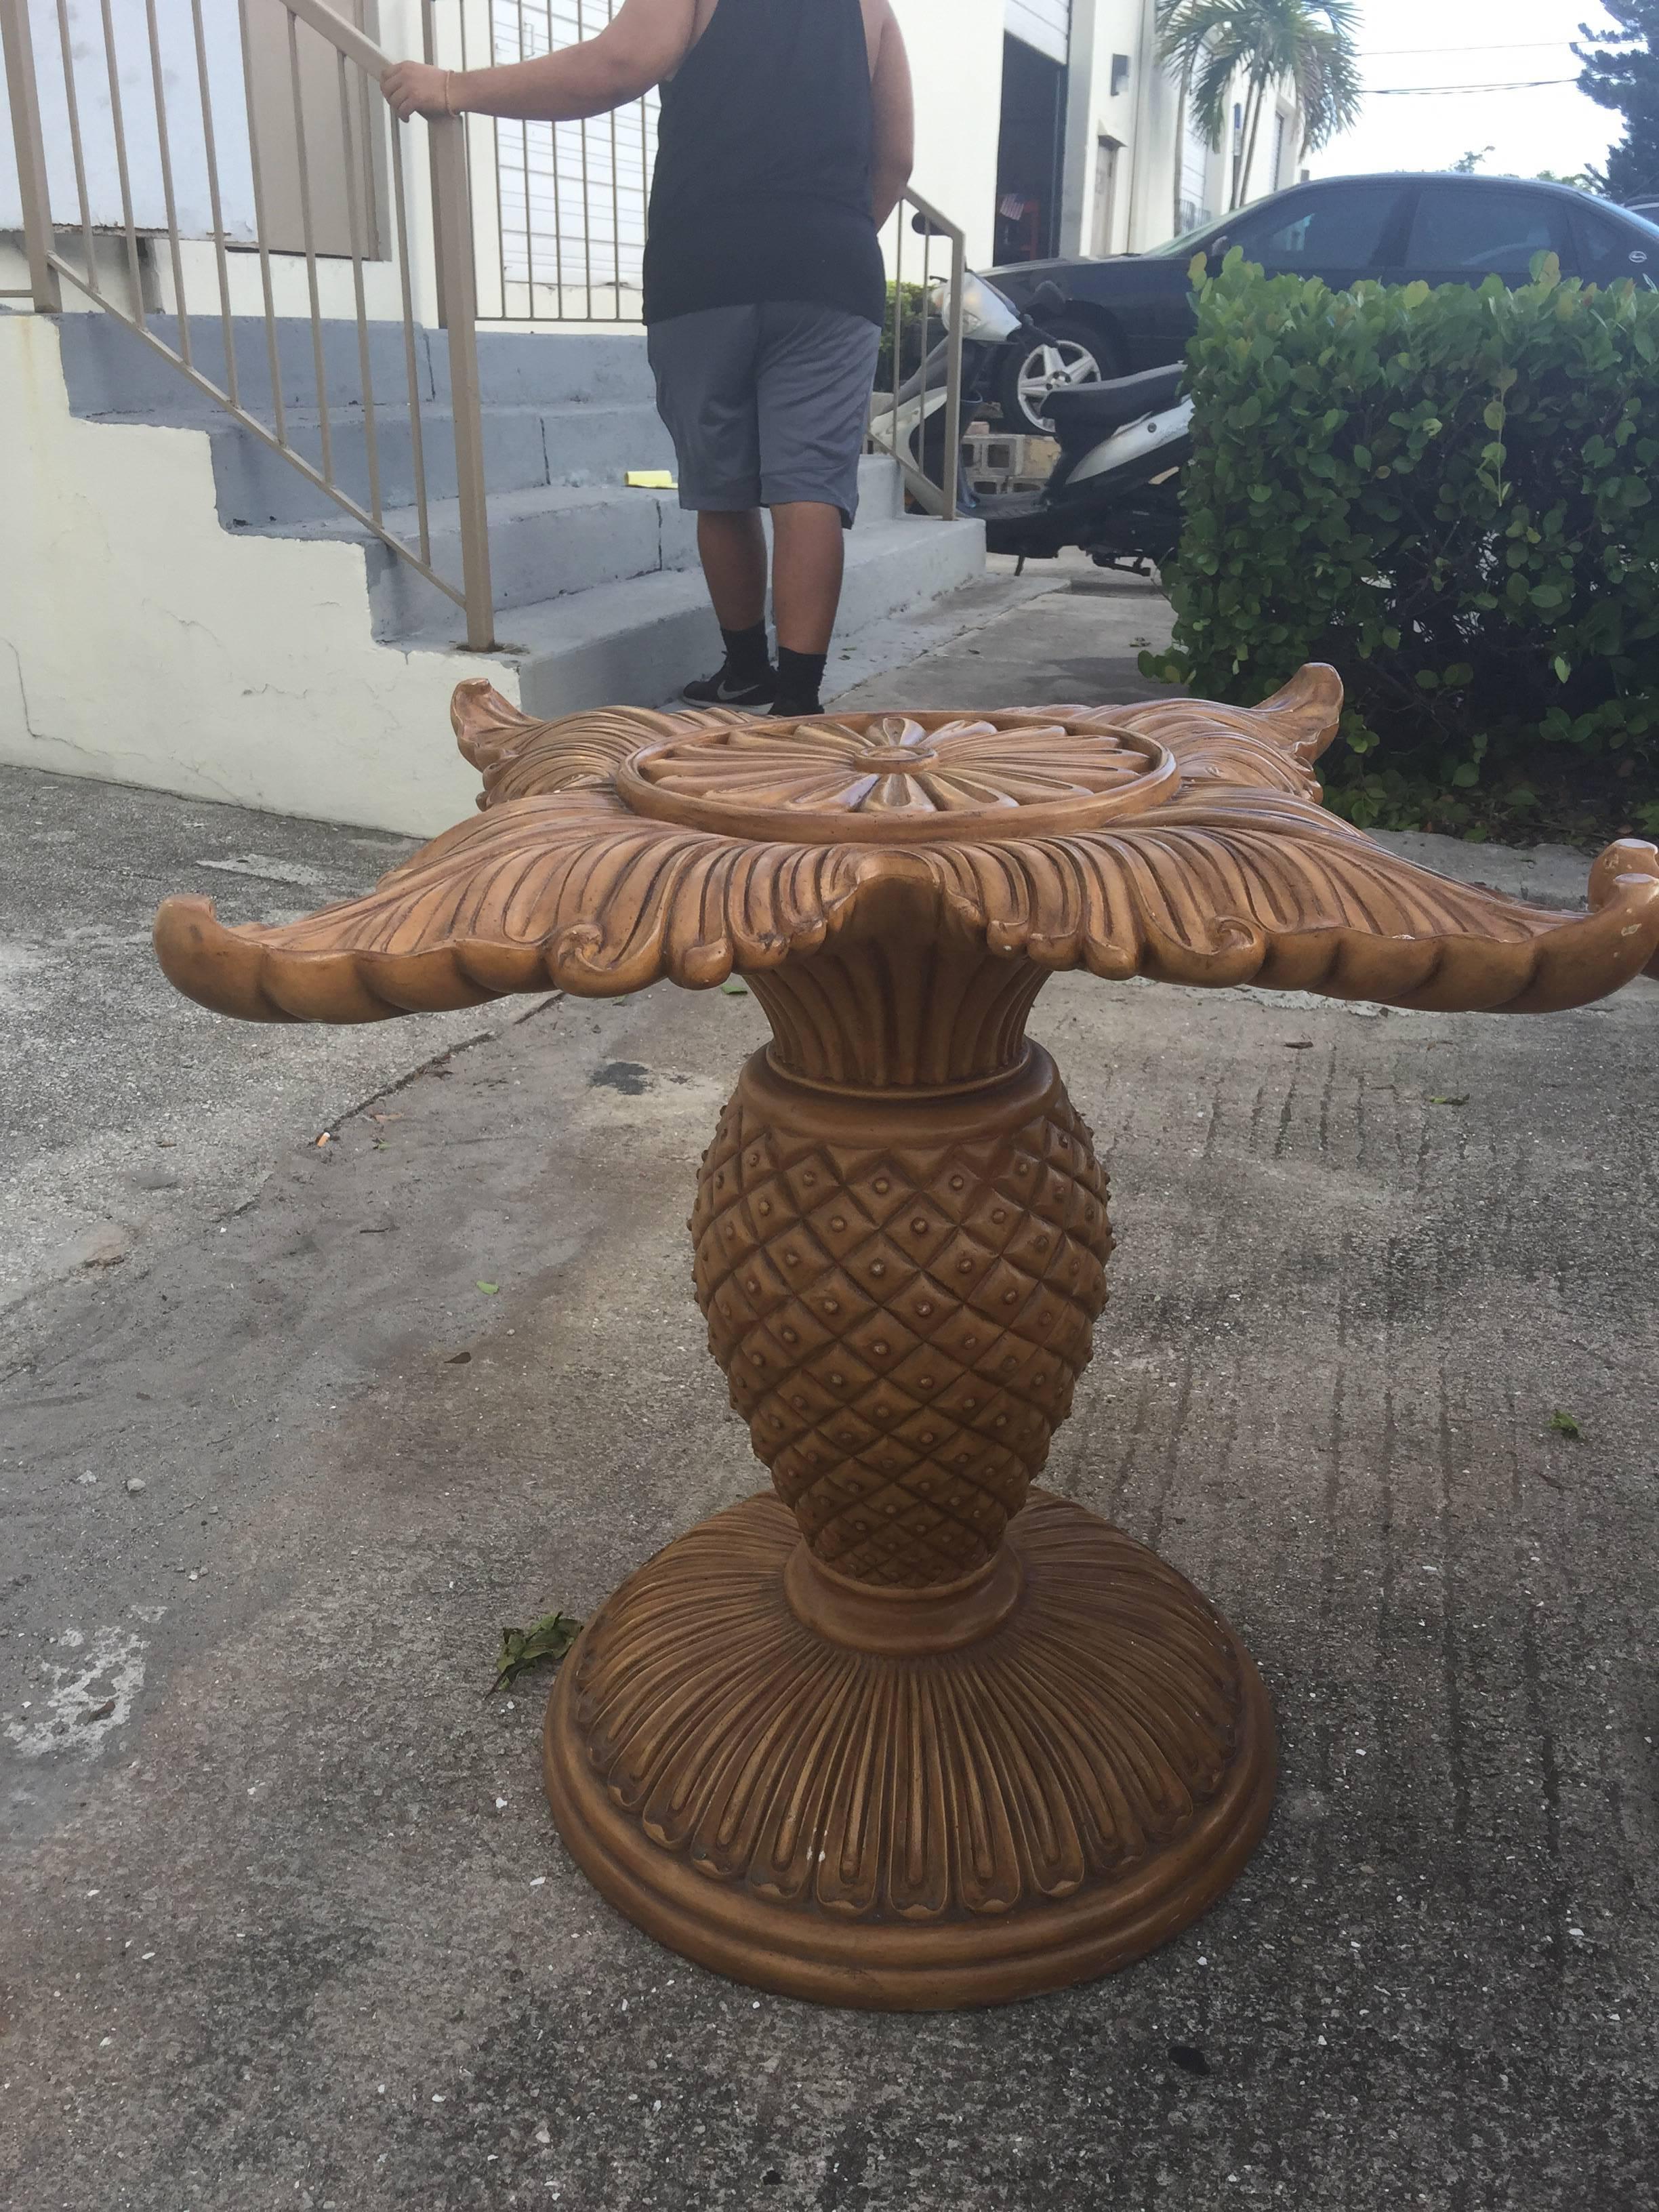 American Pair of Wood Carved Pineapple Dining Table or Desk Bases Tropical Palm Beach